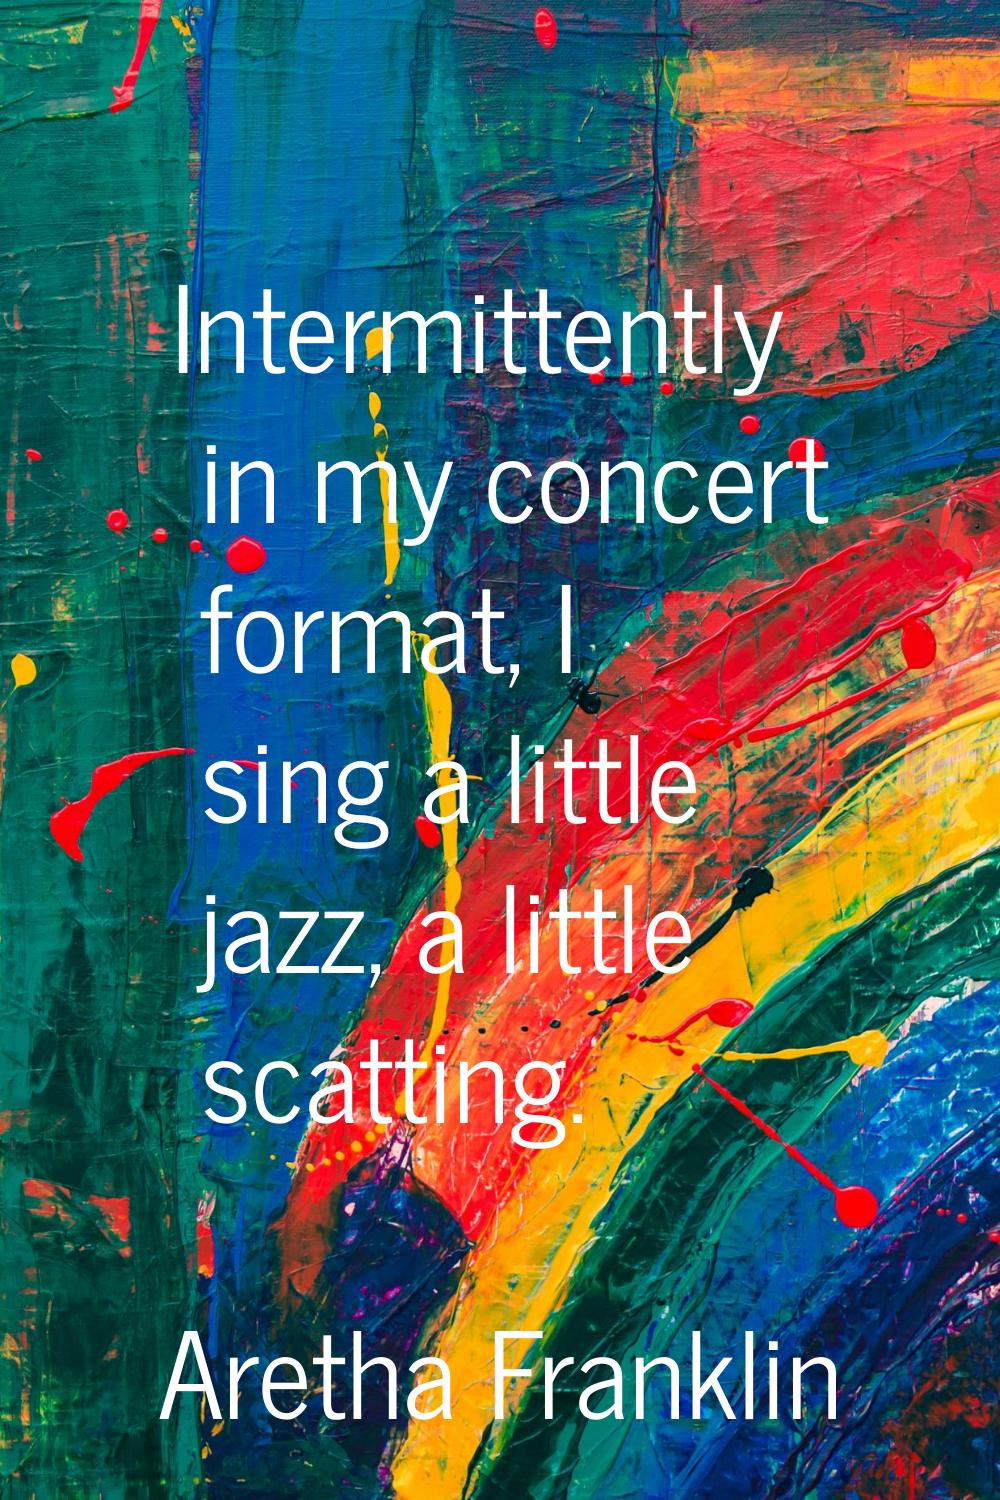 Intermittently in my concert format, I sing a little jazz, a little scatting.